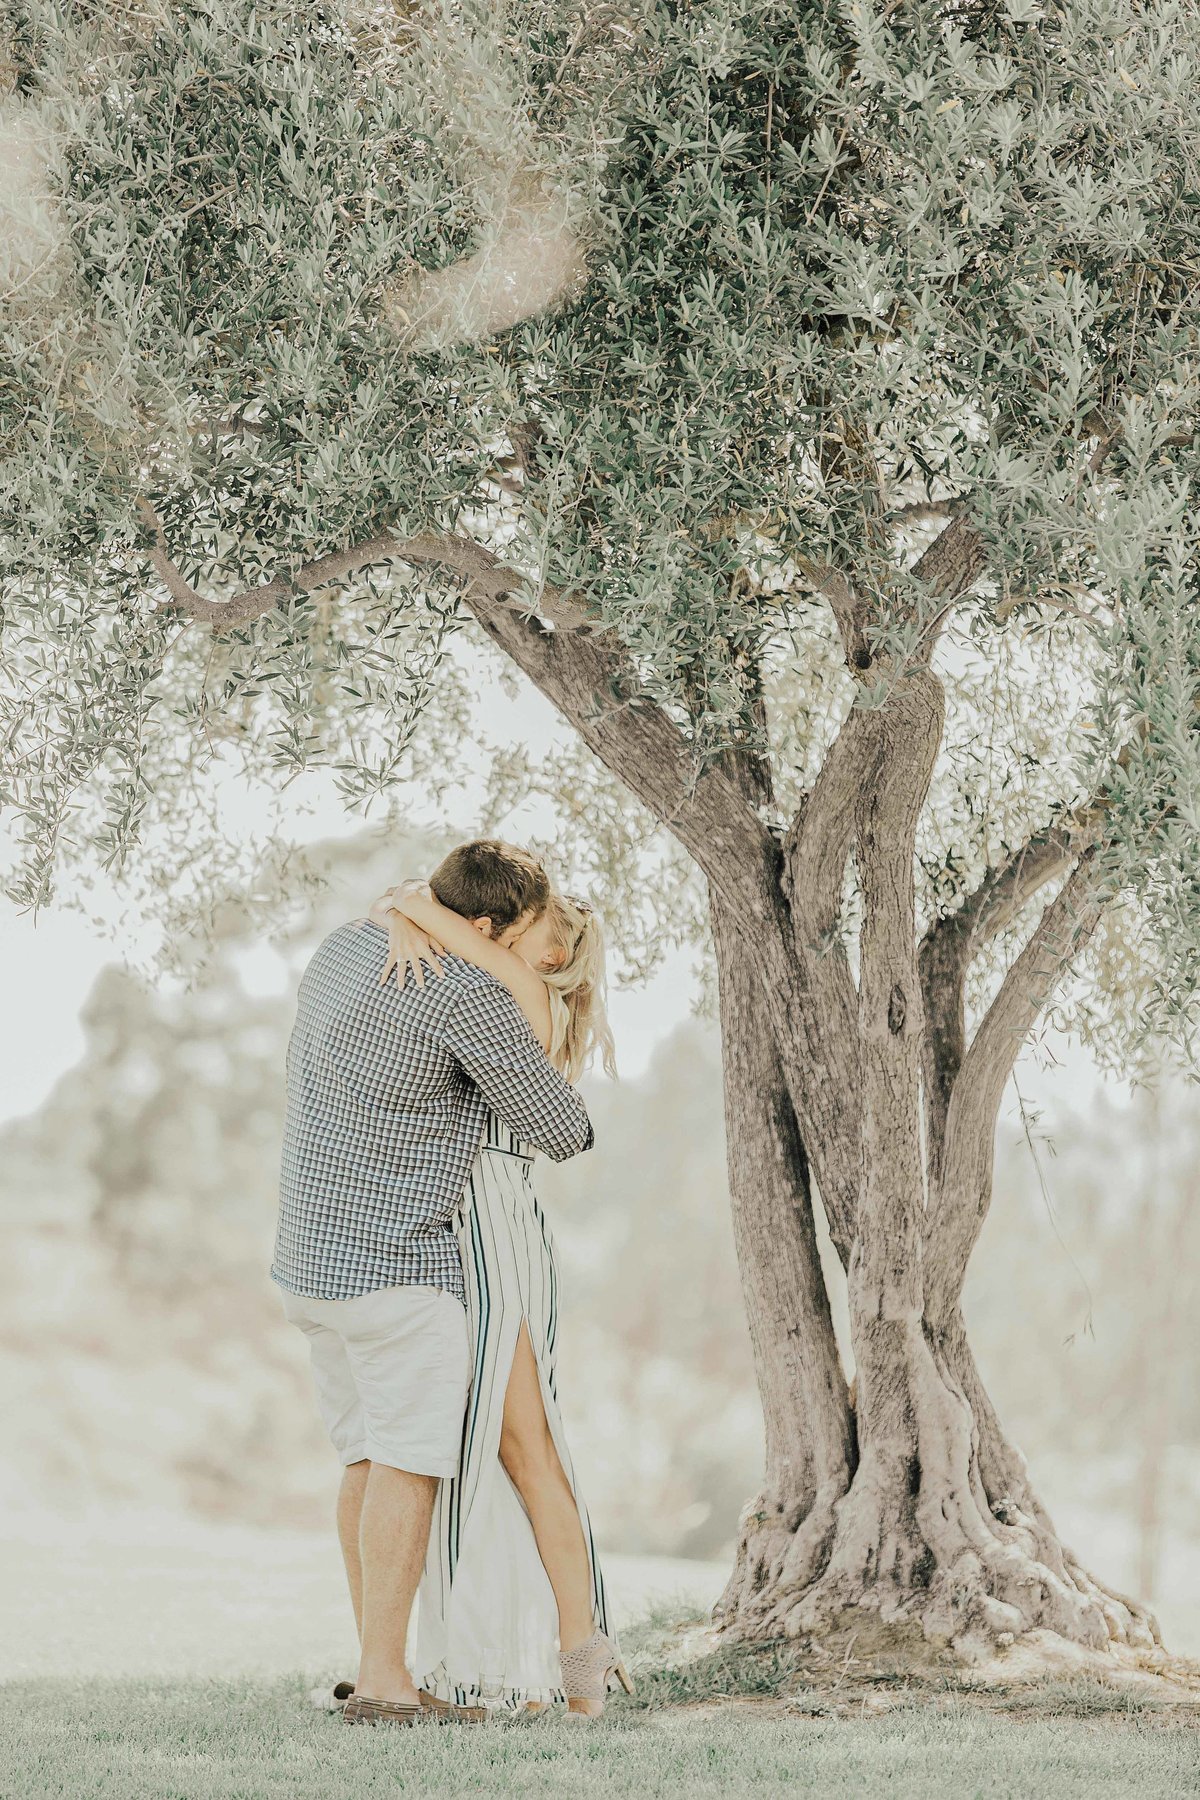 Babsie-Ly-Photography-Fine-Art-Film-Surprise-Proposal-Photographer-Temecula-Thornton-Winery-California-006